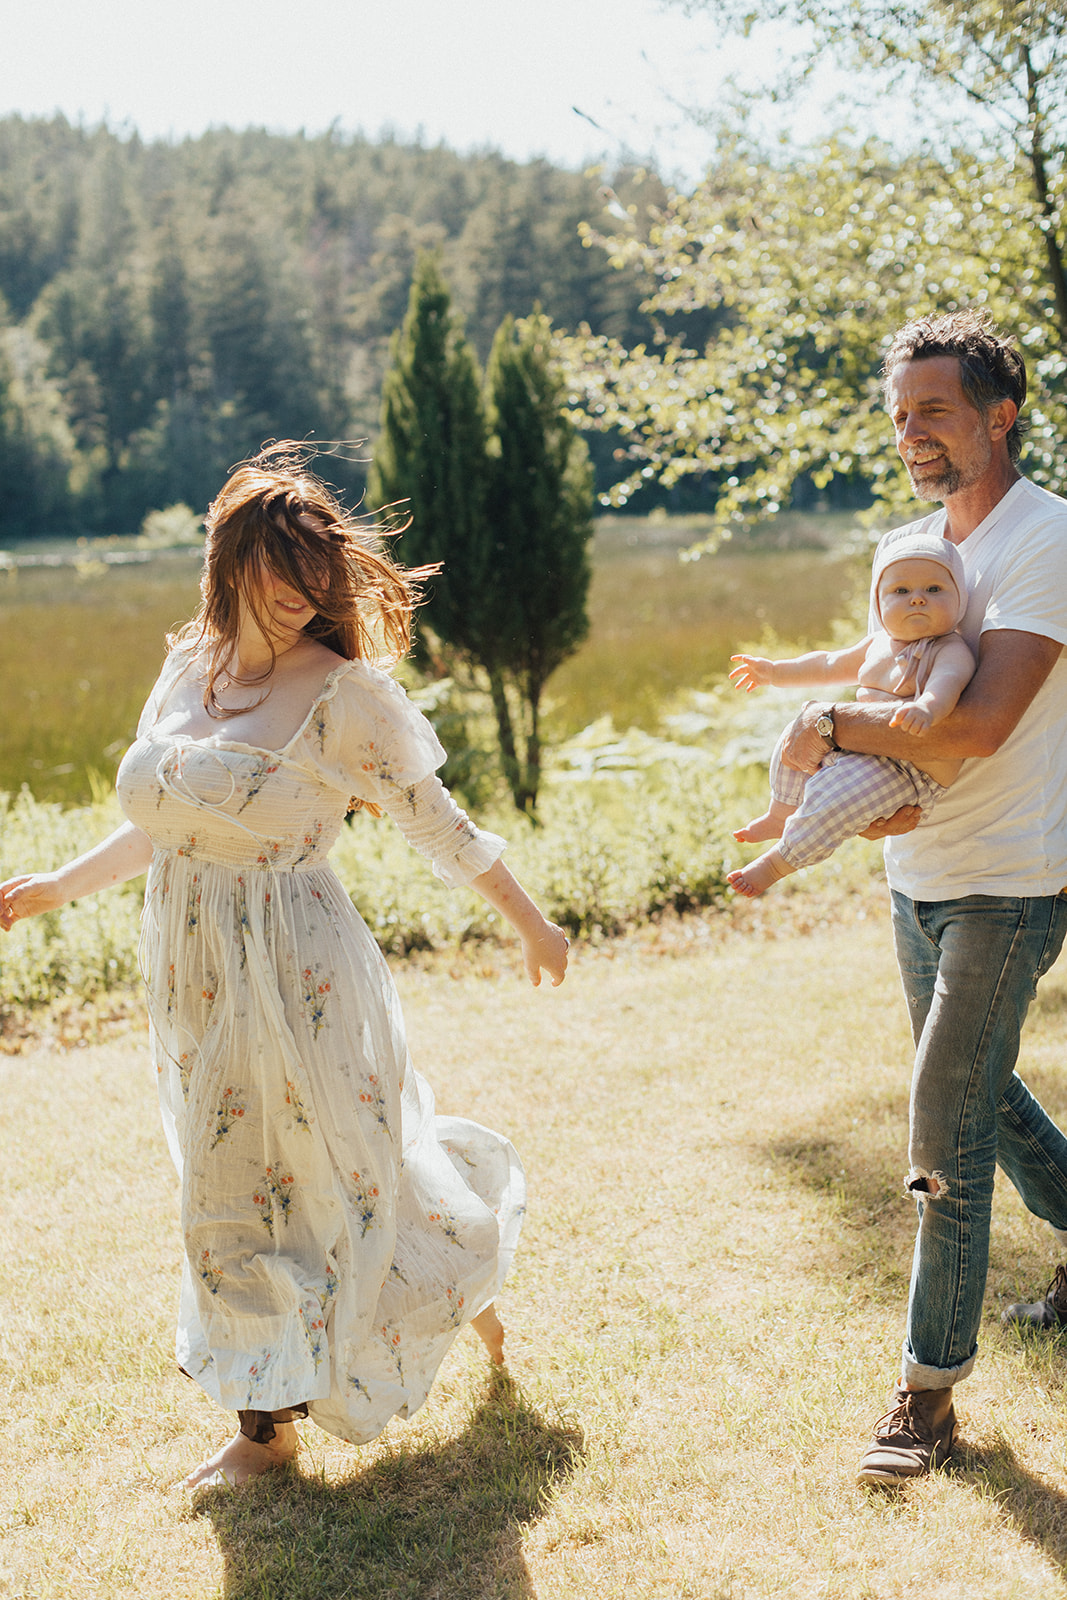 Intimate, at-home family portrait on Orcas Island